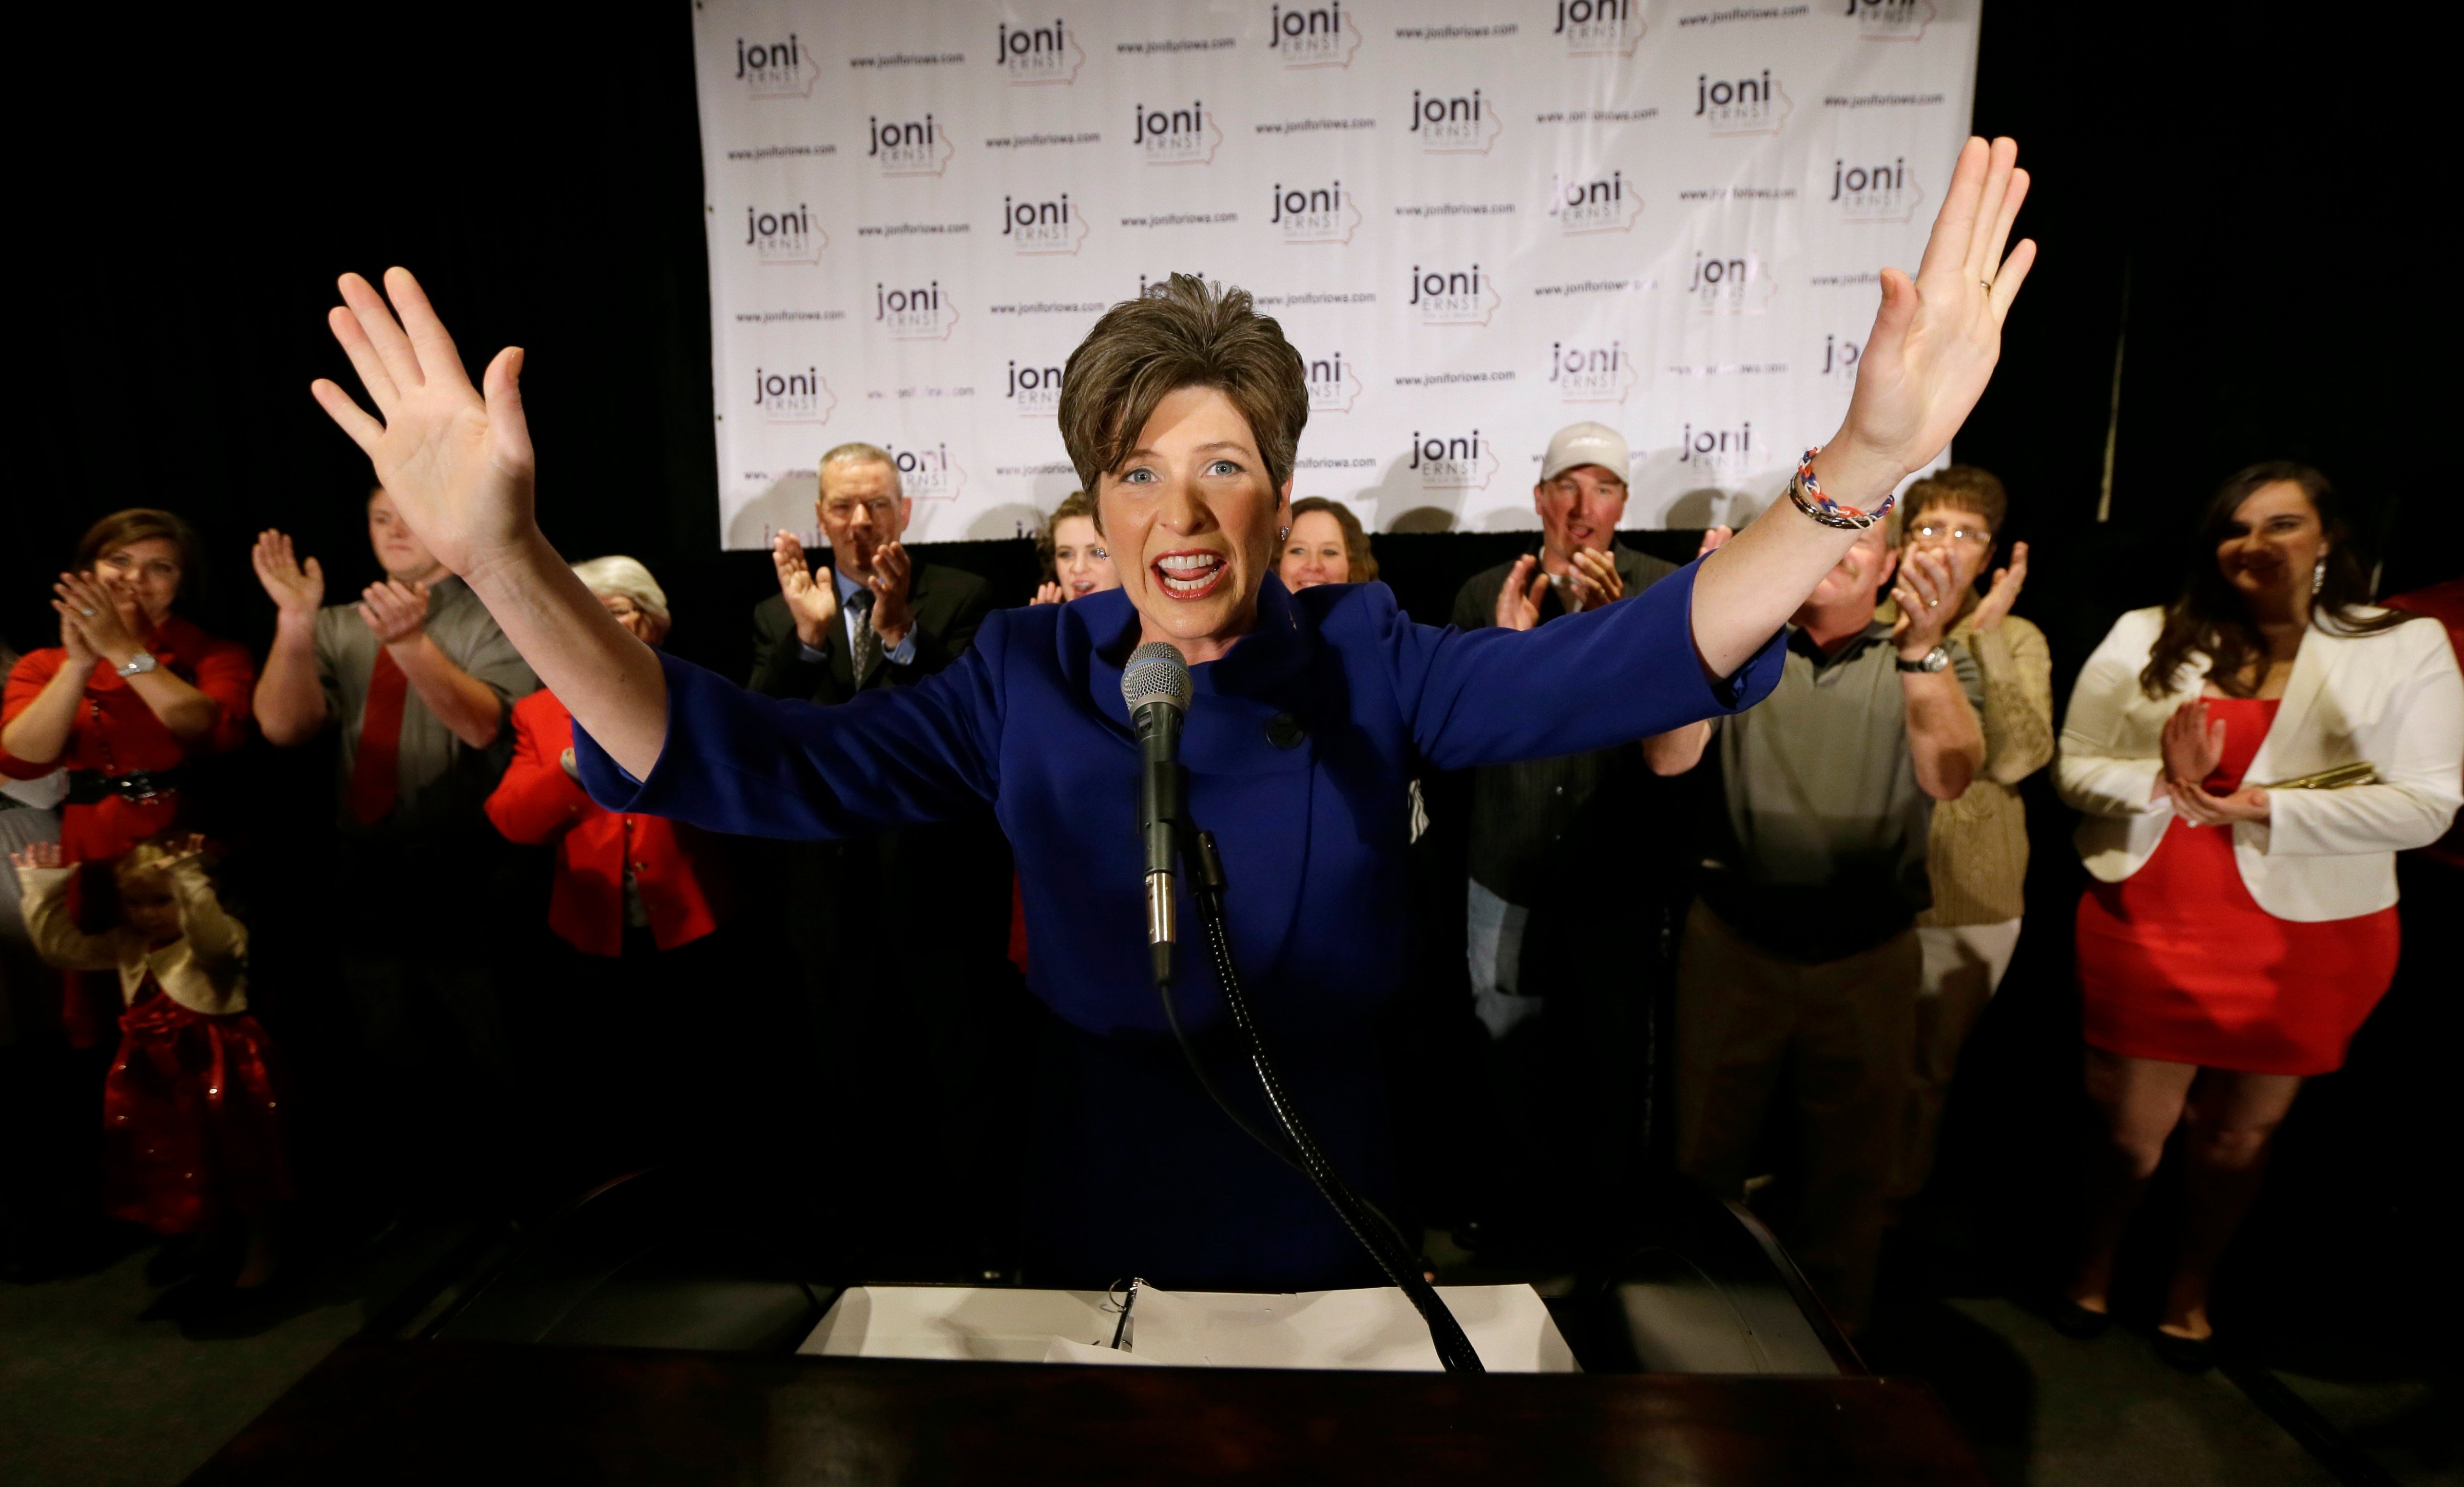 U.S. Sen.-elect Joni Ernst speaks to supporters during an election night rally on Nov. 4, 2014, in West Des Moines, Iowa. Ernst defeated U.S. Rep. Bruce Braley, D-Iowa, in the race to replace retiring U.S. Sen. Tom Harkin. (Charlie Neibergall—AP)